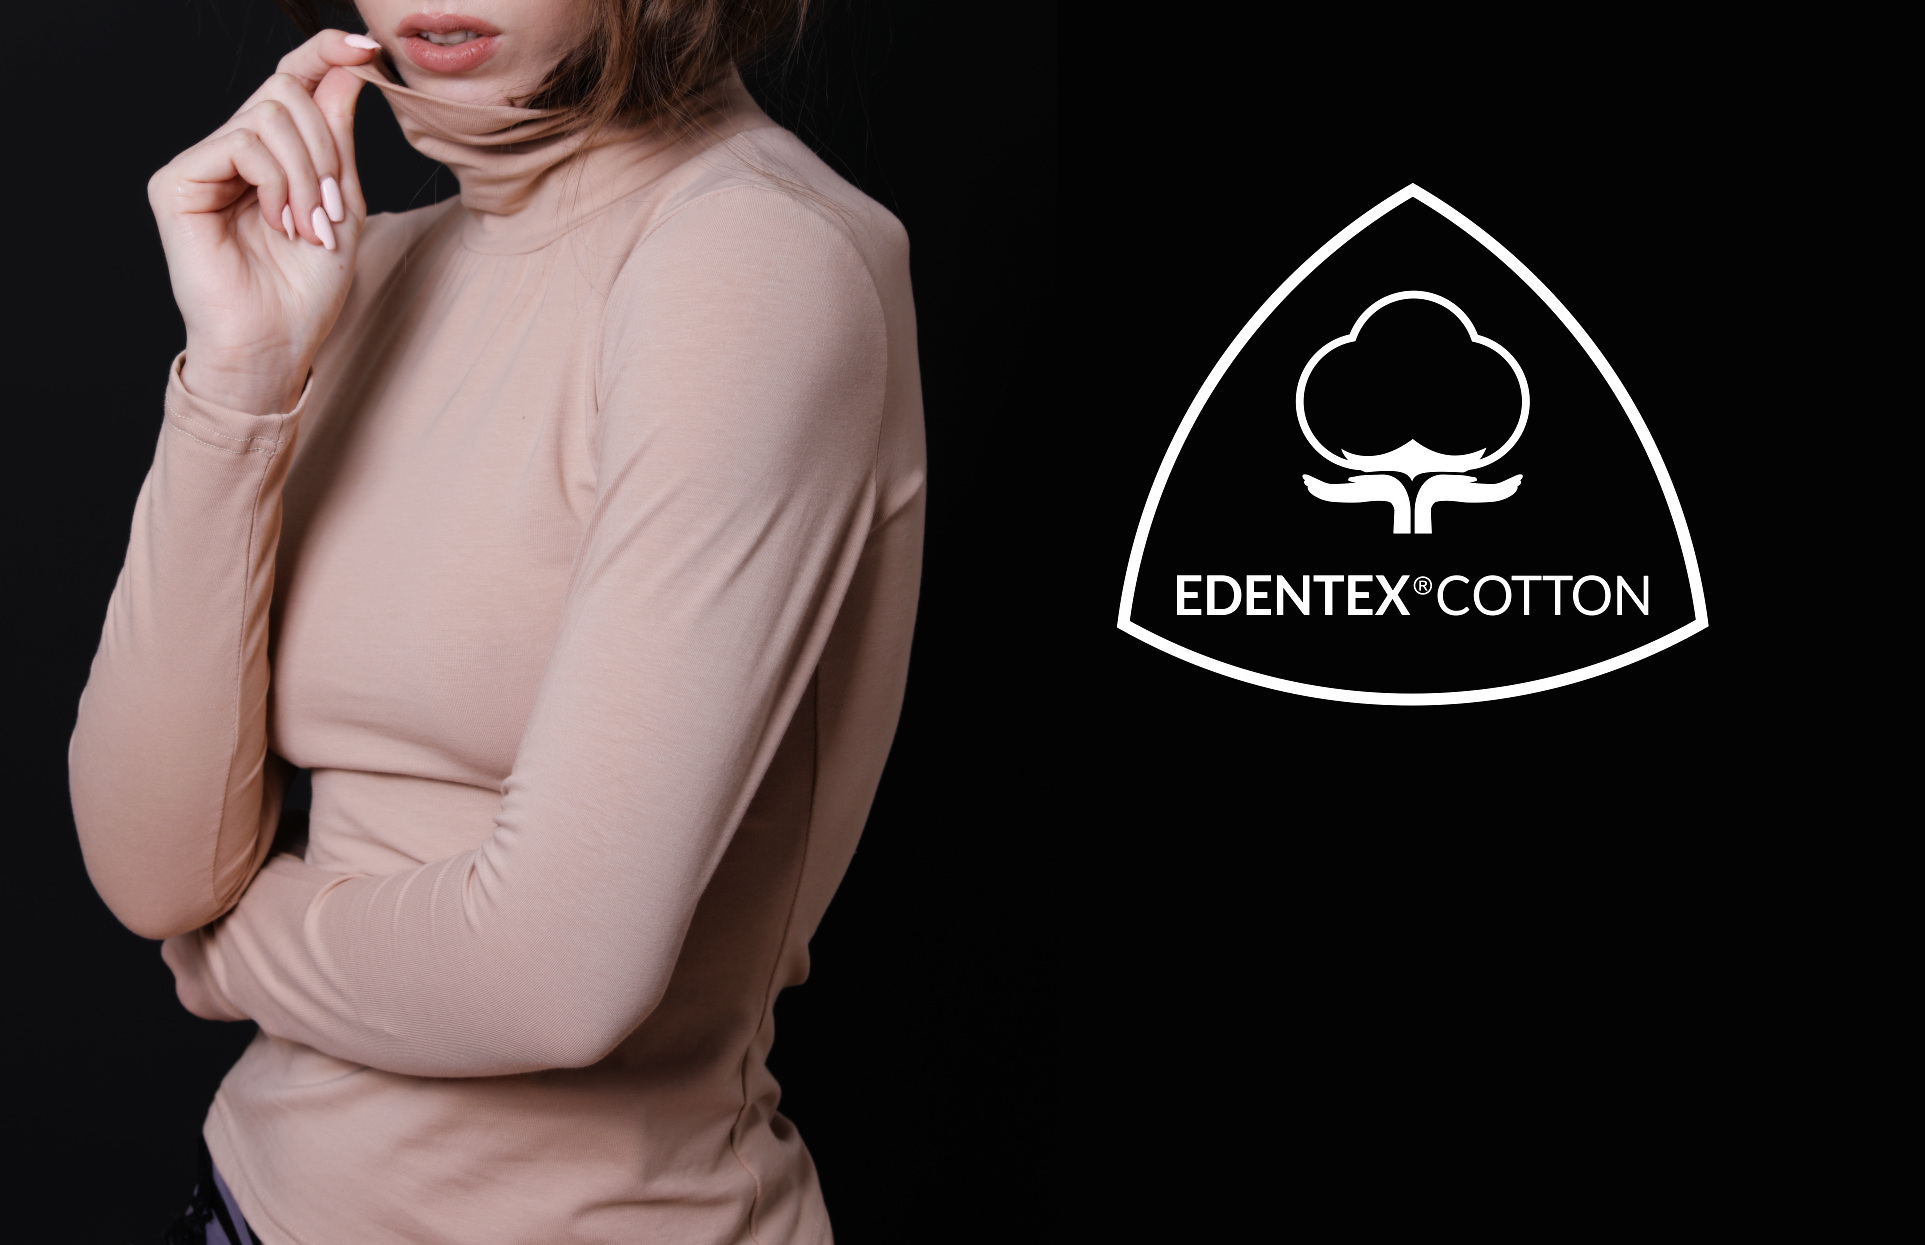 For delightfully soft touch and durability of fabrics, EDENTEX SOFT FINISHING™ was created